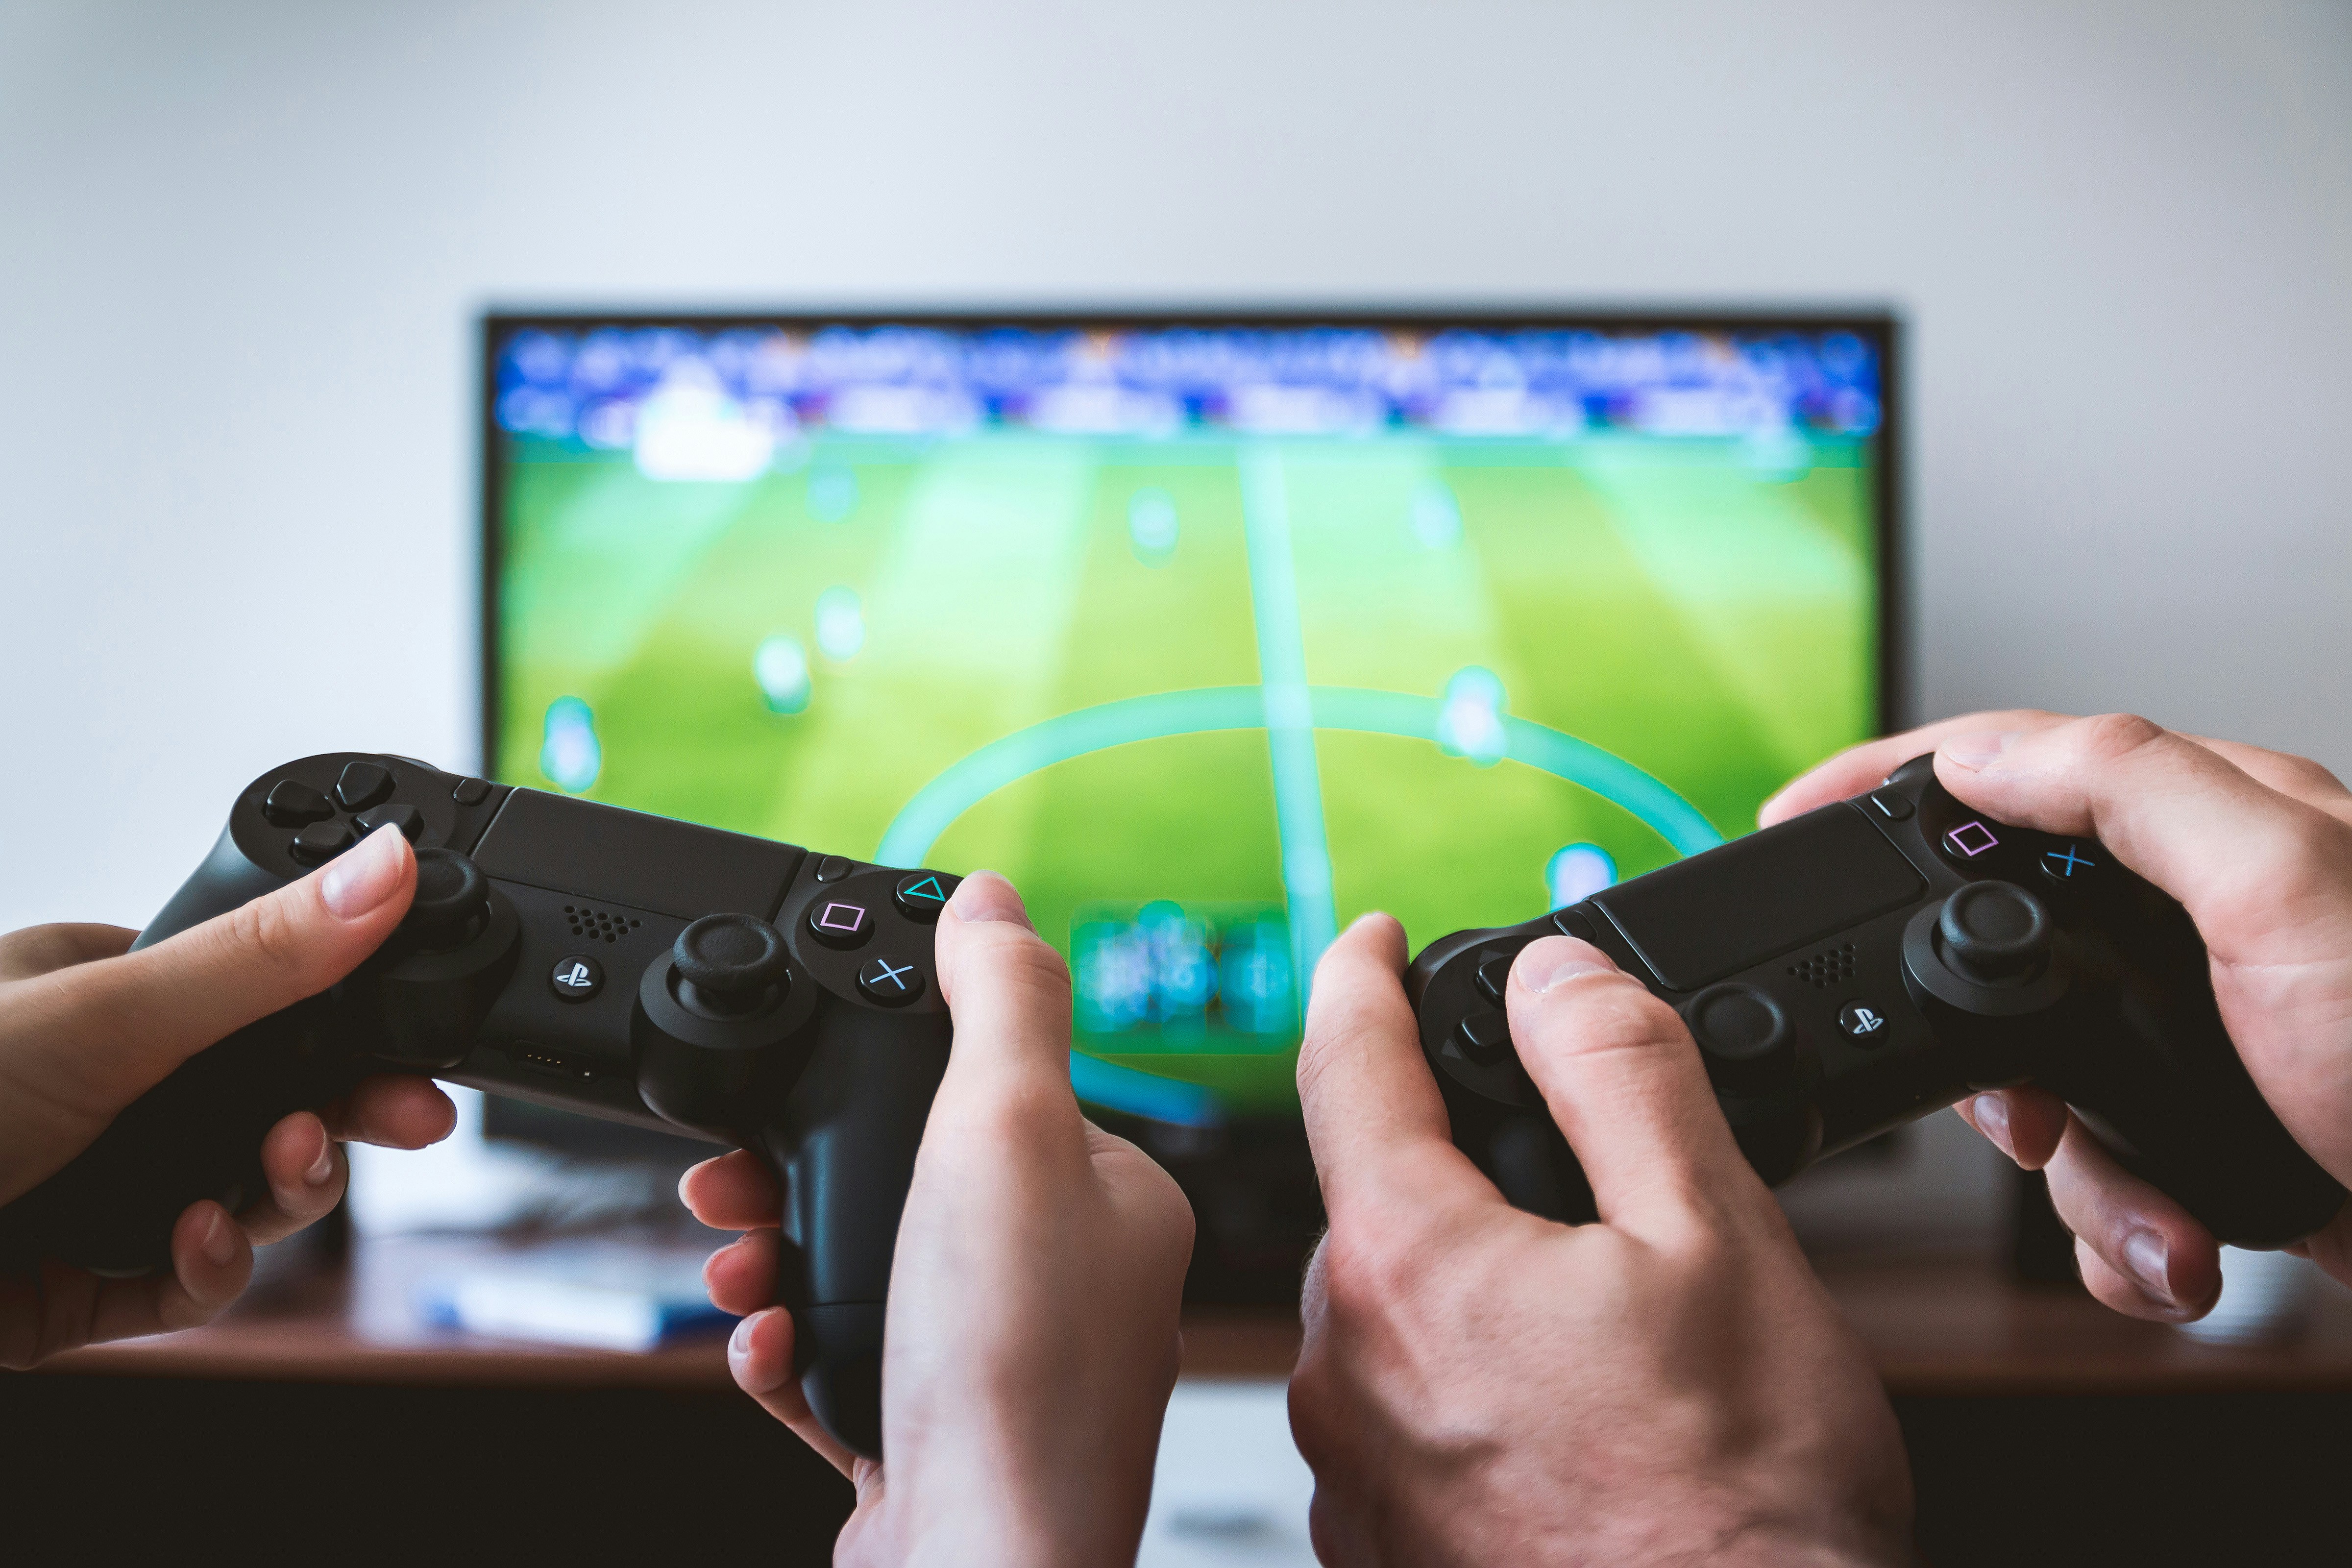 Two playstation controllers held by two hands in front of a television showing a football game